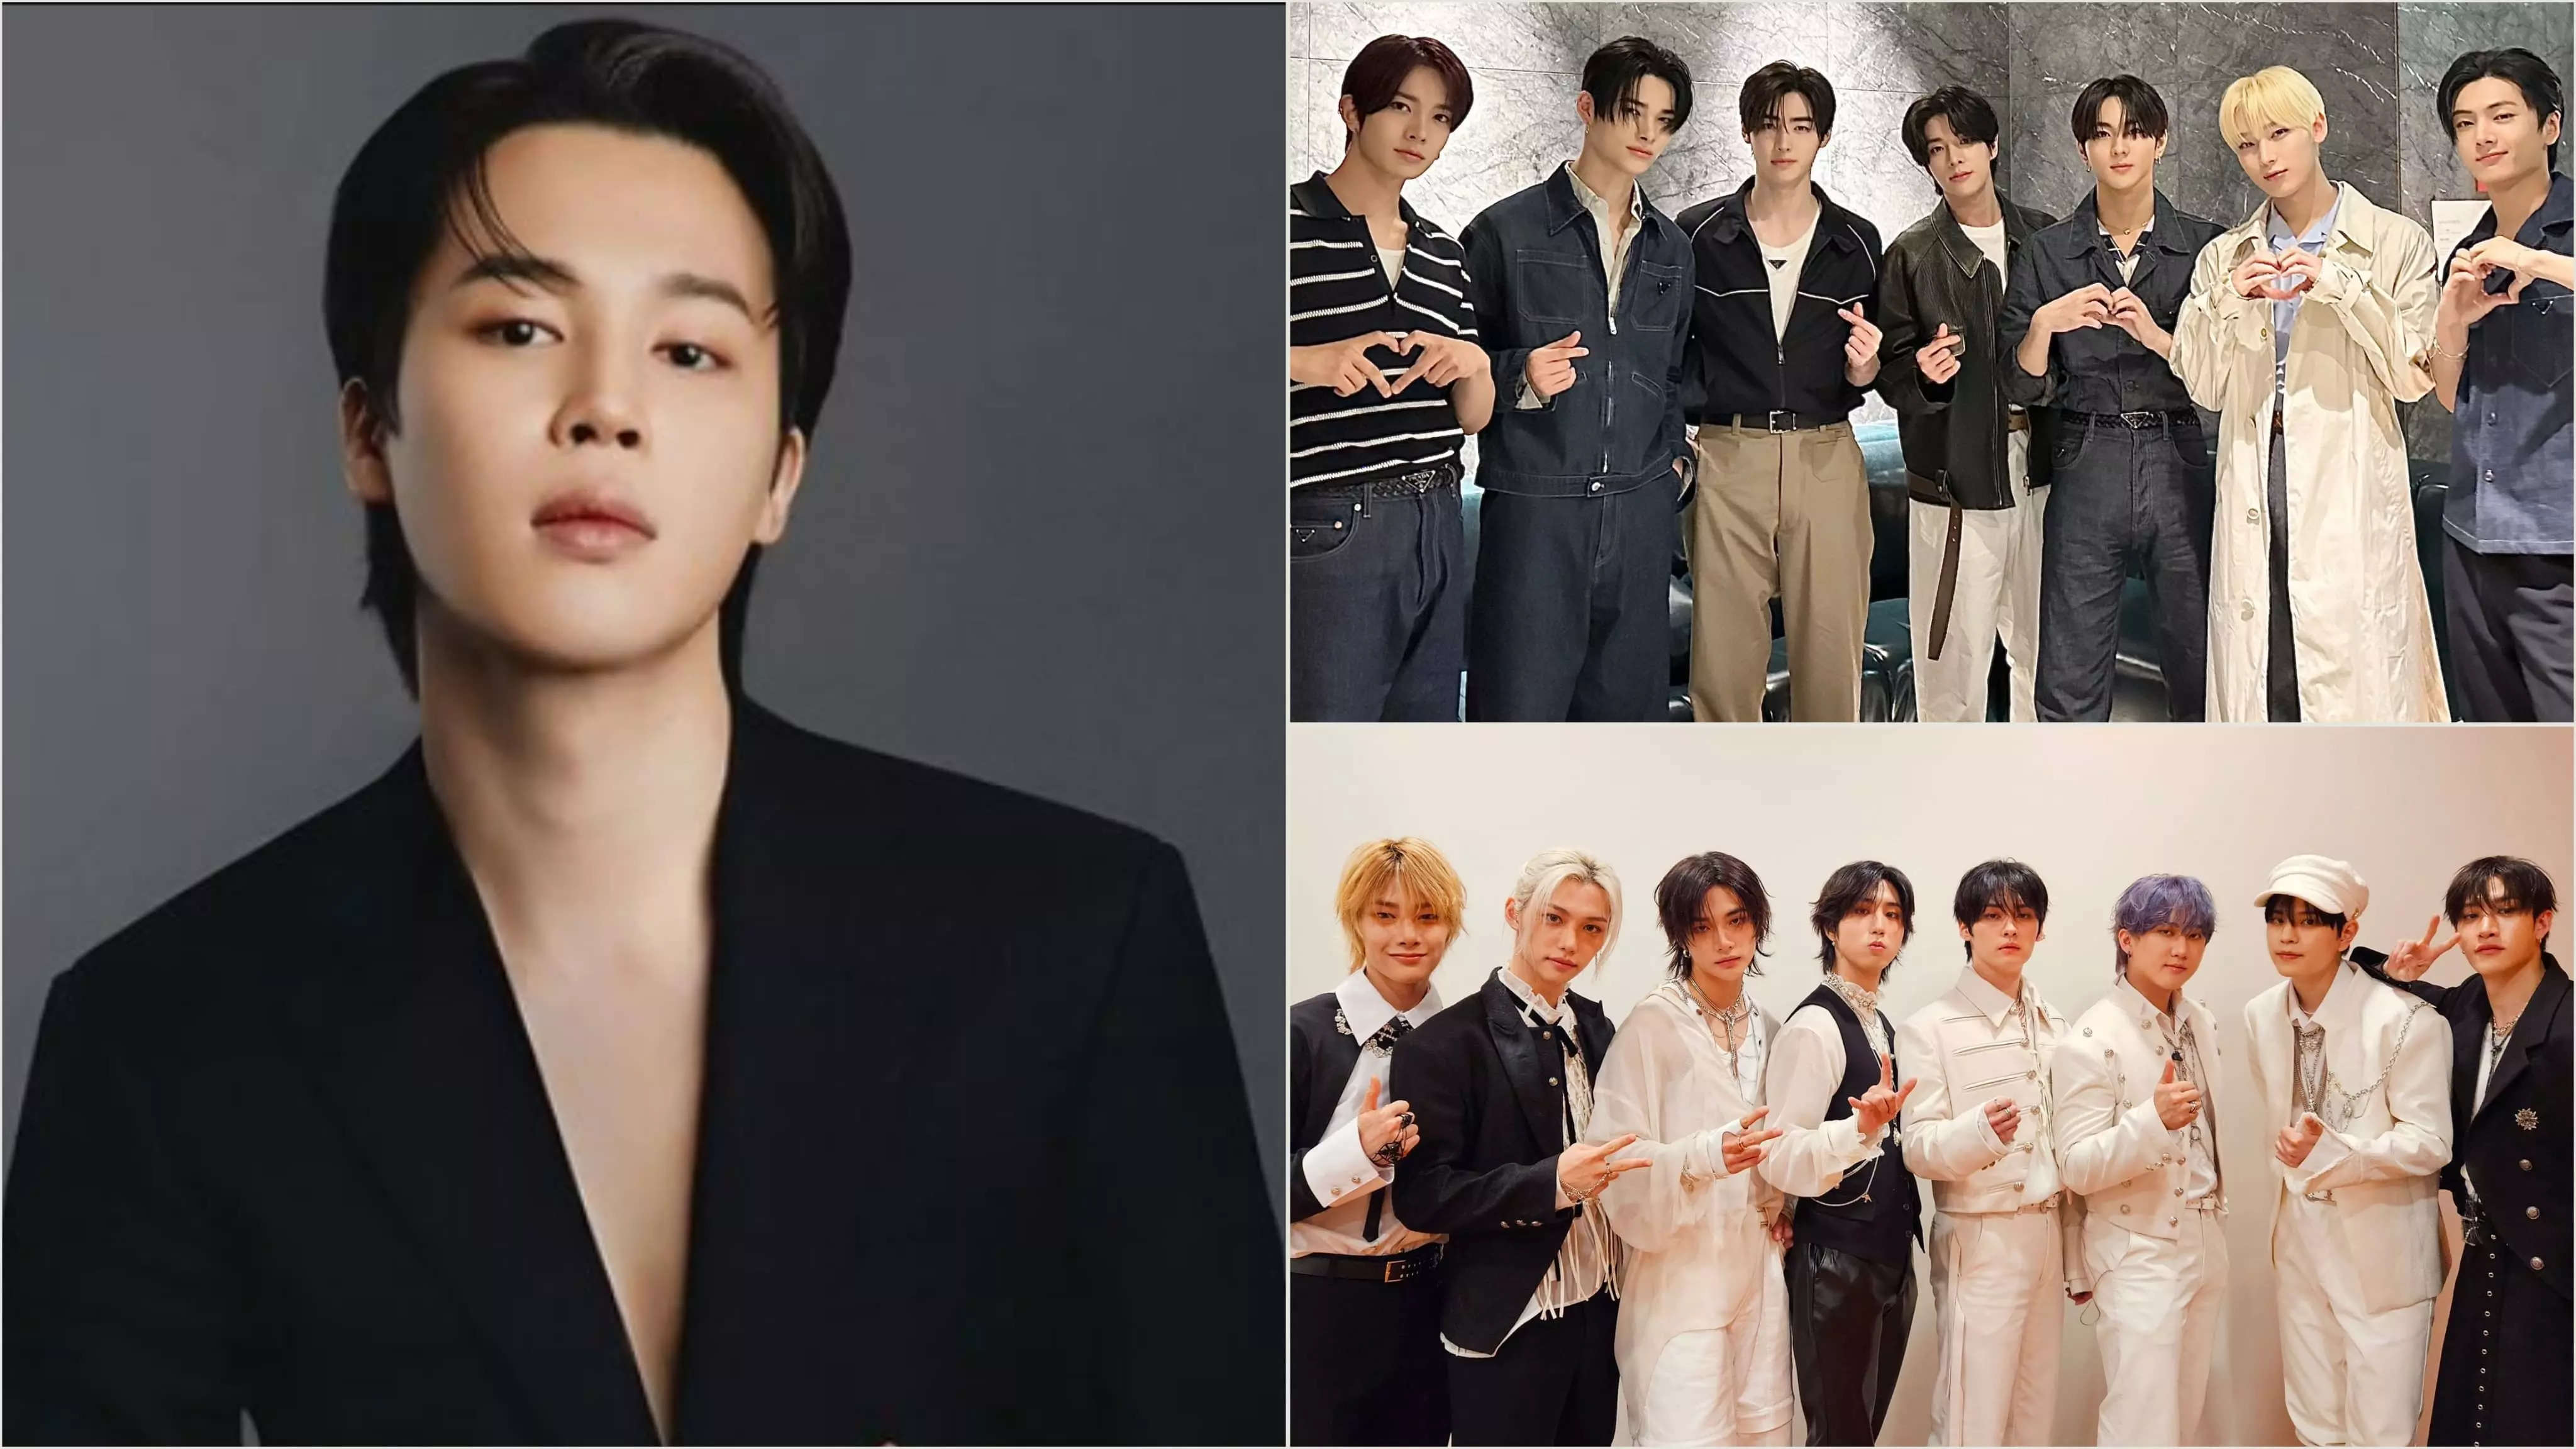 Kpop artists set to drop hot releases this July